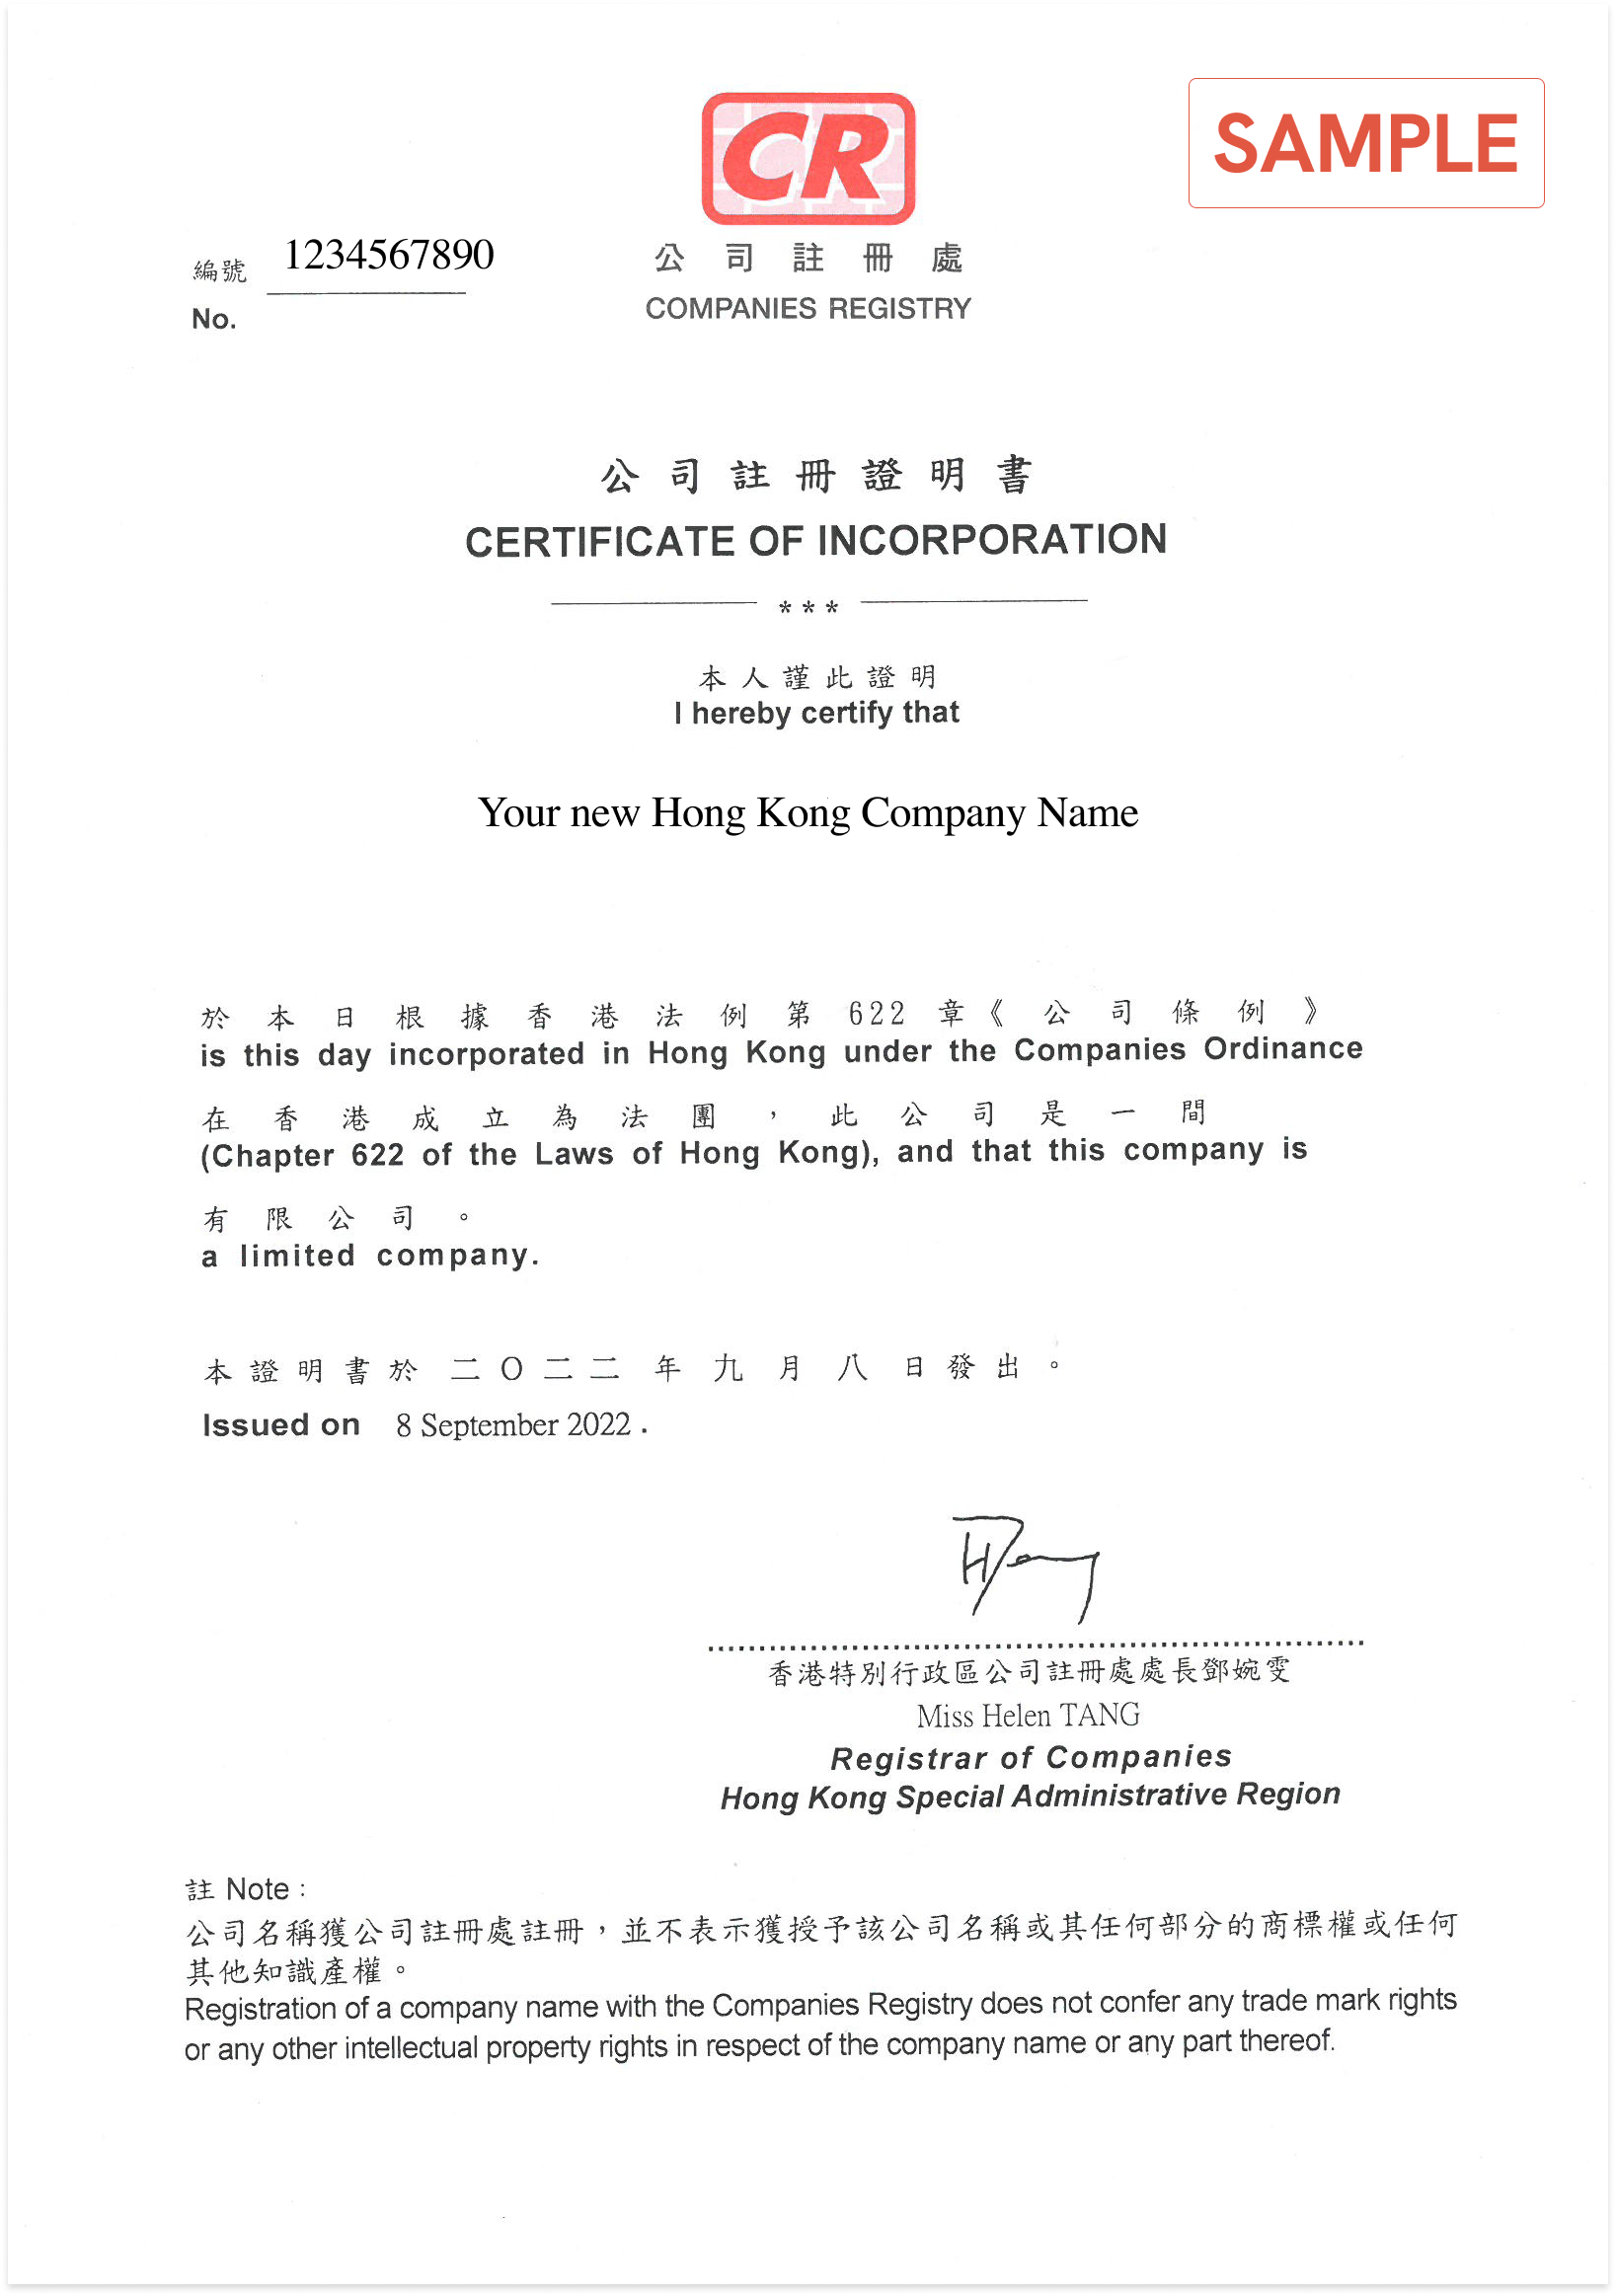 A real example of a certificate of incorporation in hong kong